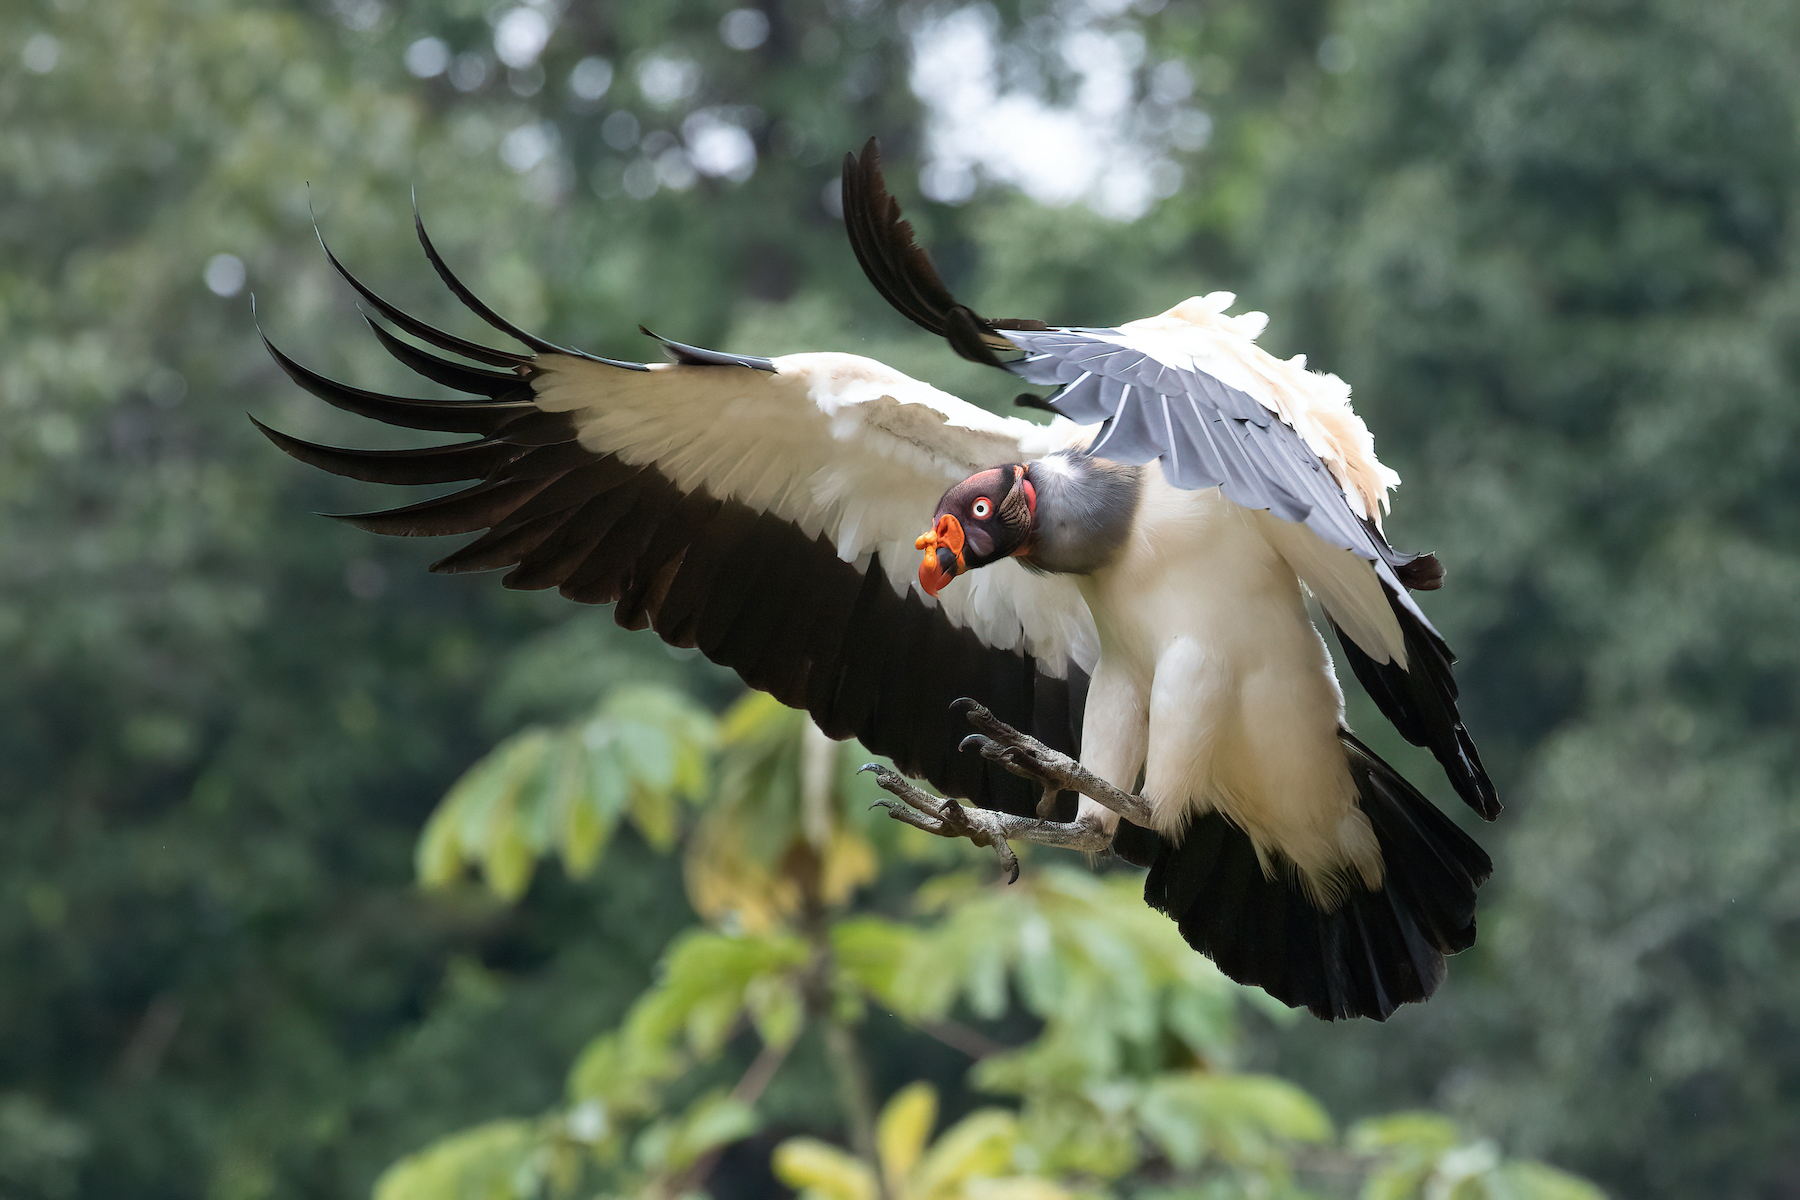 Learn to master birds in flight in low light by spending a morning with the King Vultures of Costa Rica